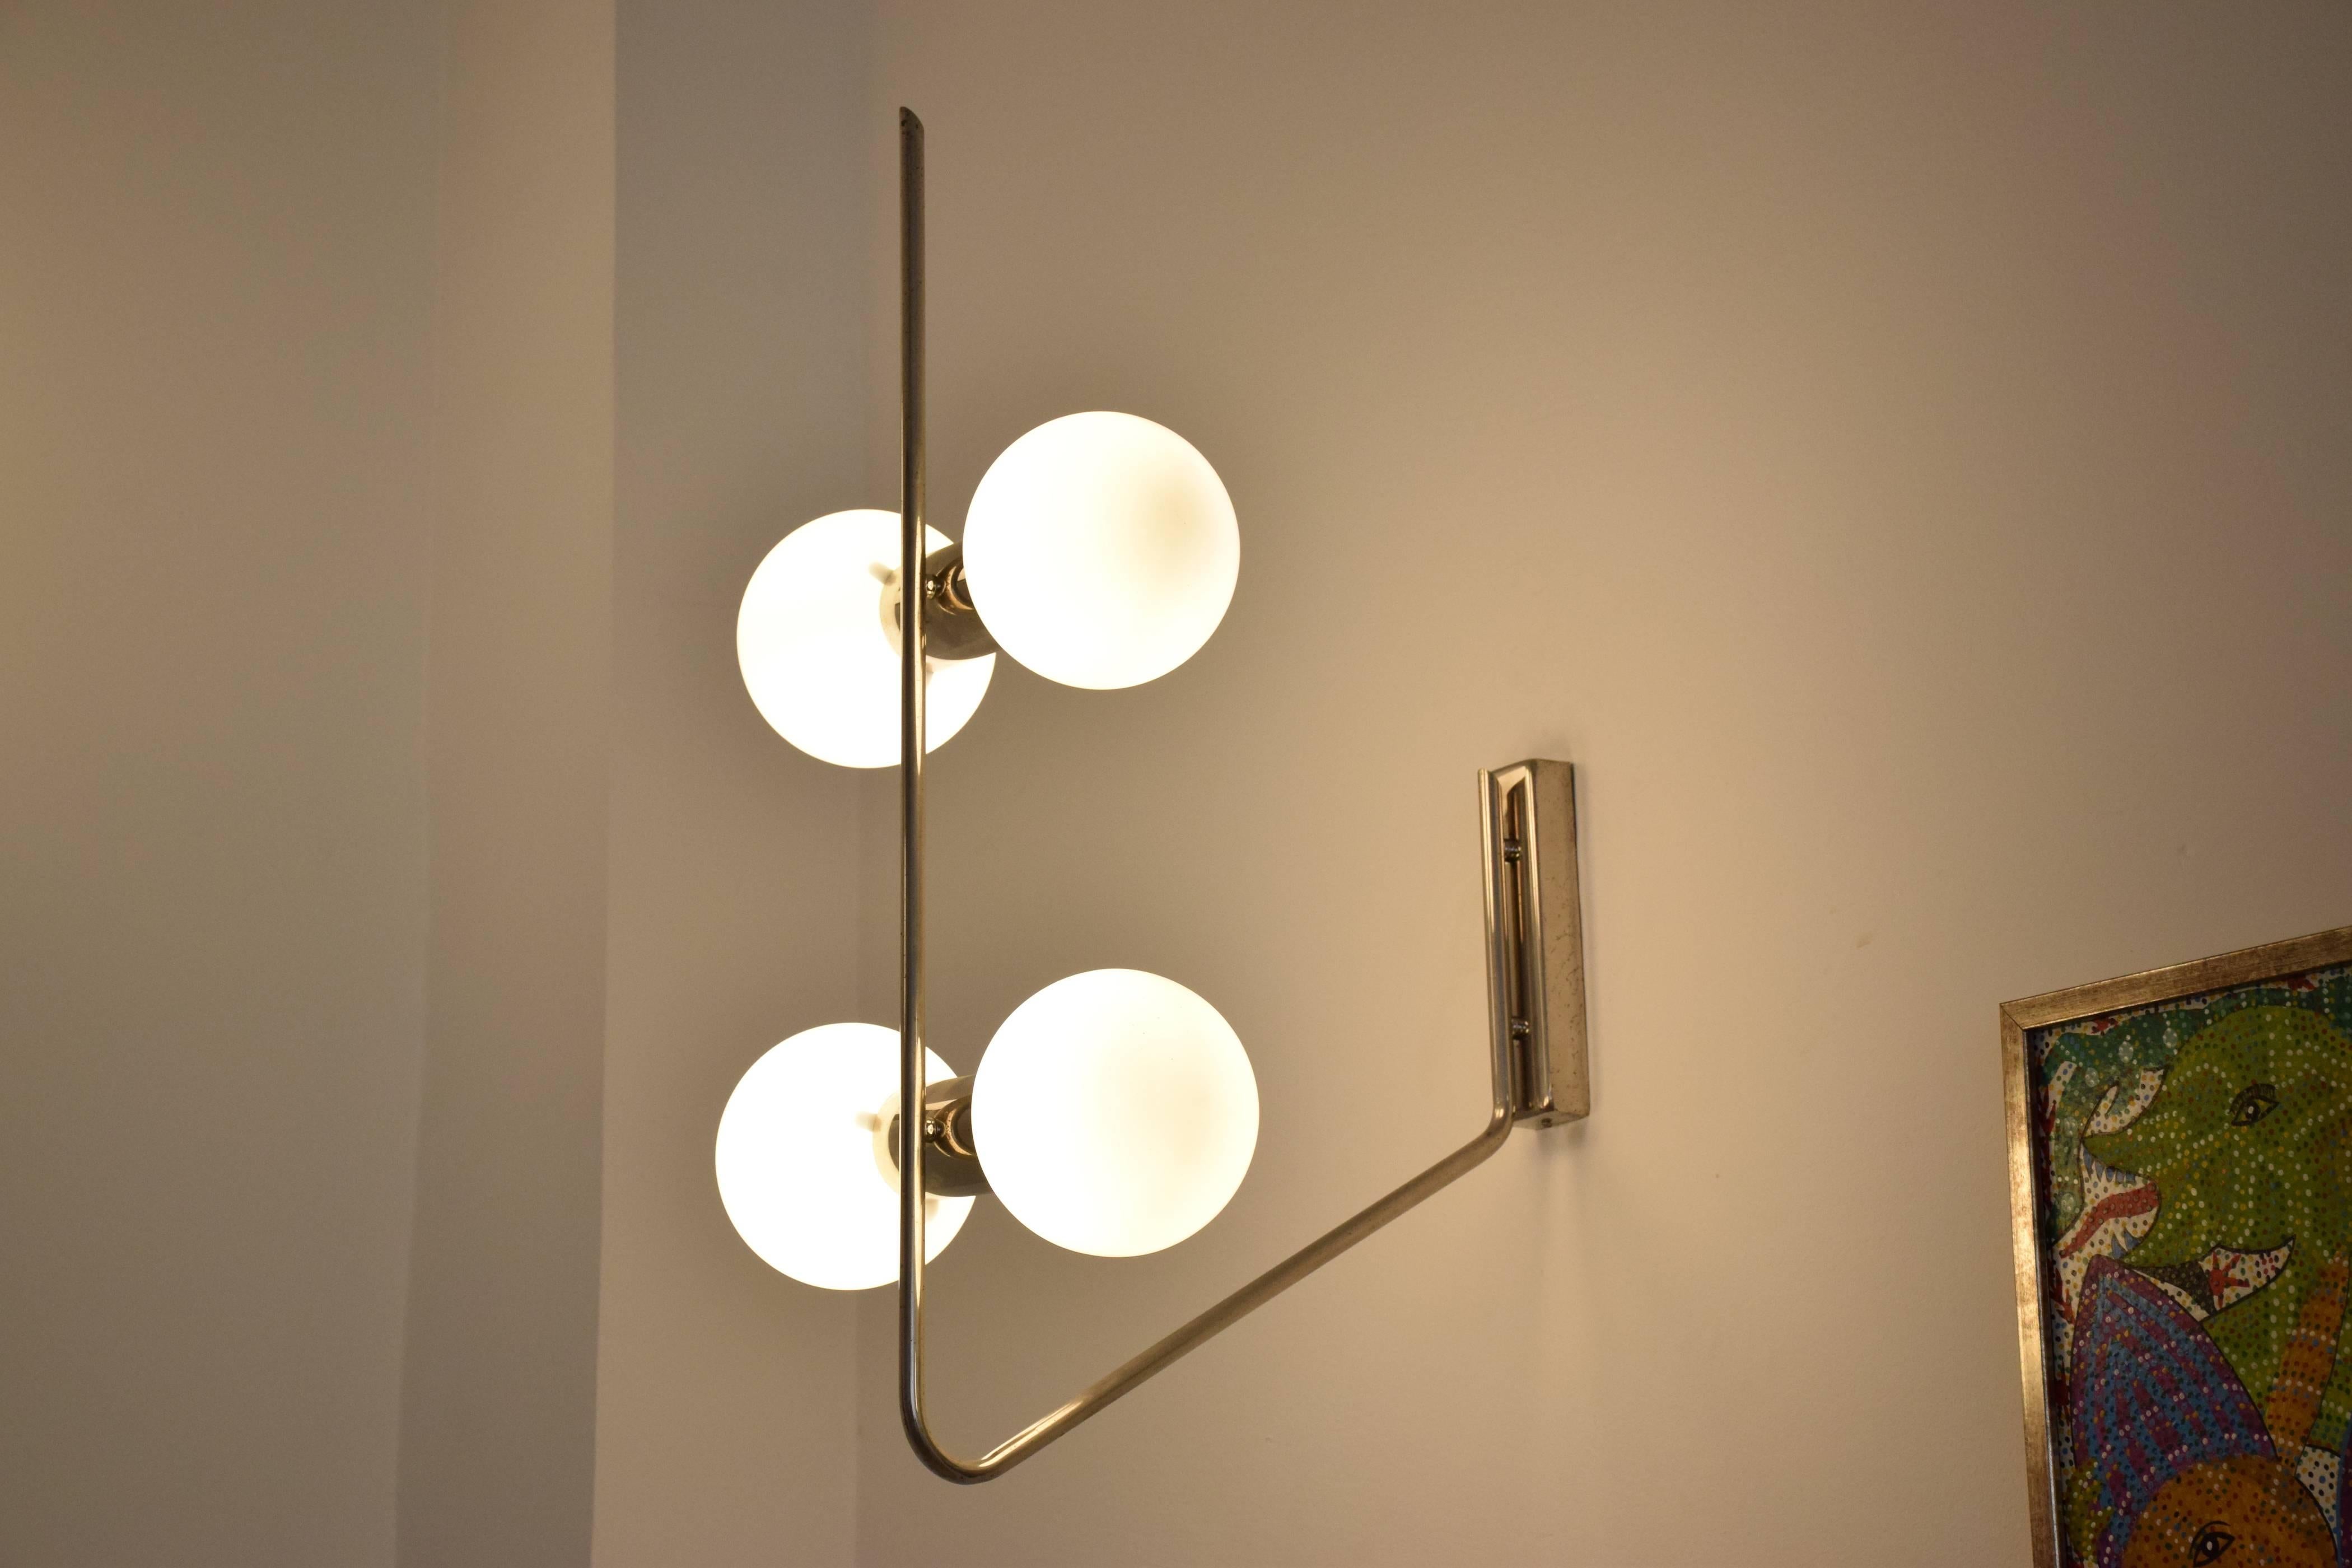 Pair of Italian 20th century vintage wall lights or sconces attributed to Stilnovo circa 1960s-1970s designed with a slender chrome stem and four symmetrical boule shaped white opaque shades of Space Age design.
Each glob can hold 40 - 60 watts so